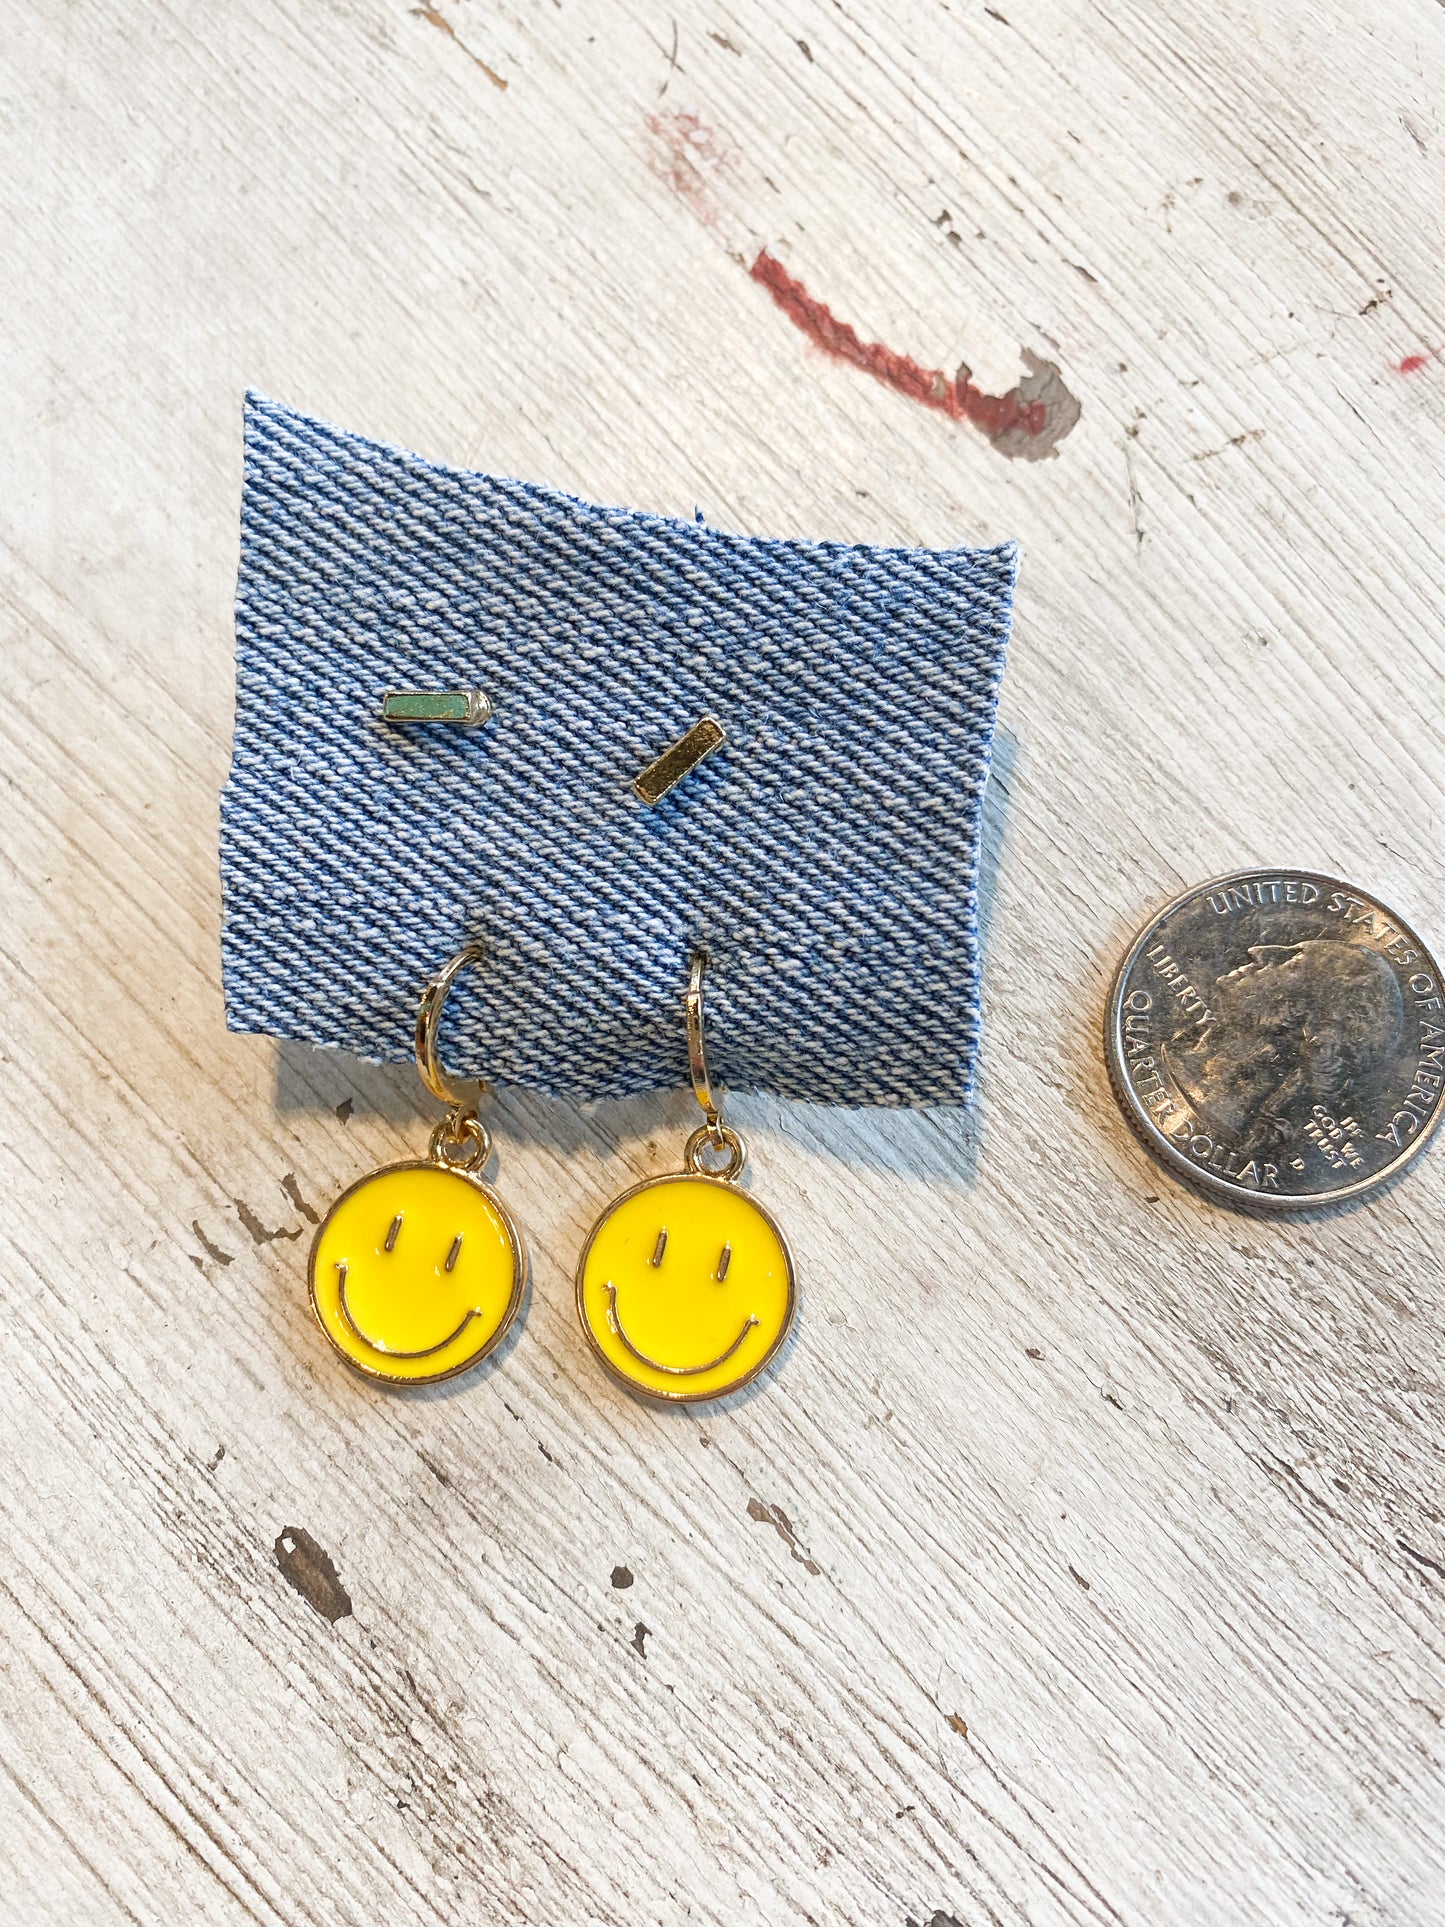 Smiley face and bars gold earring stud set